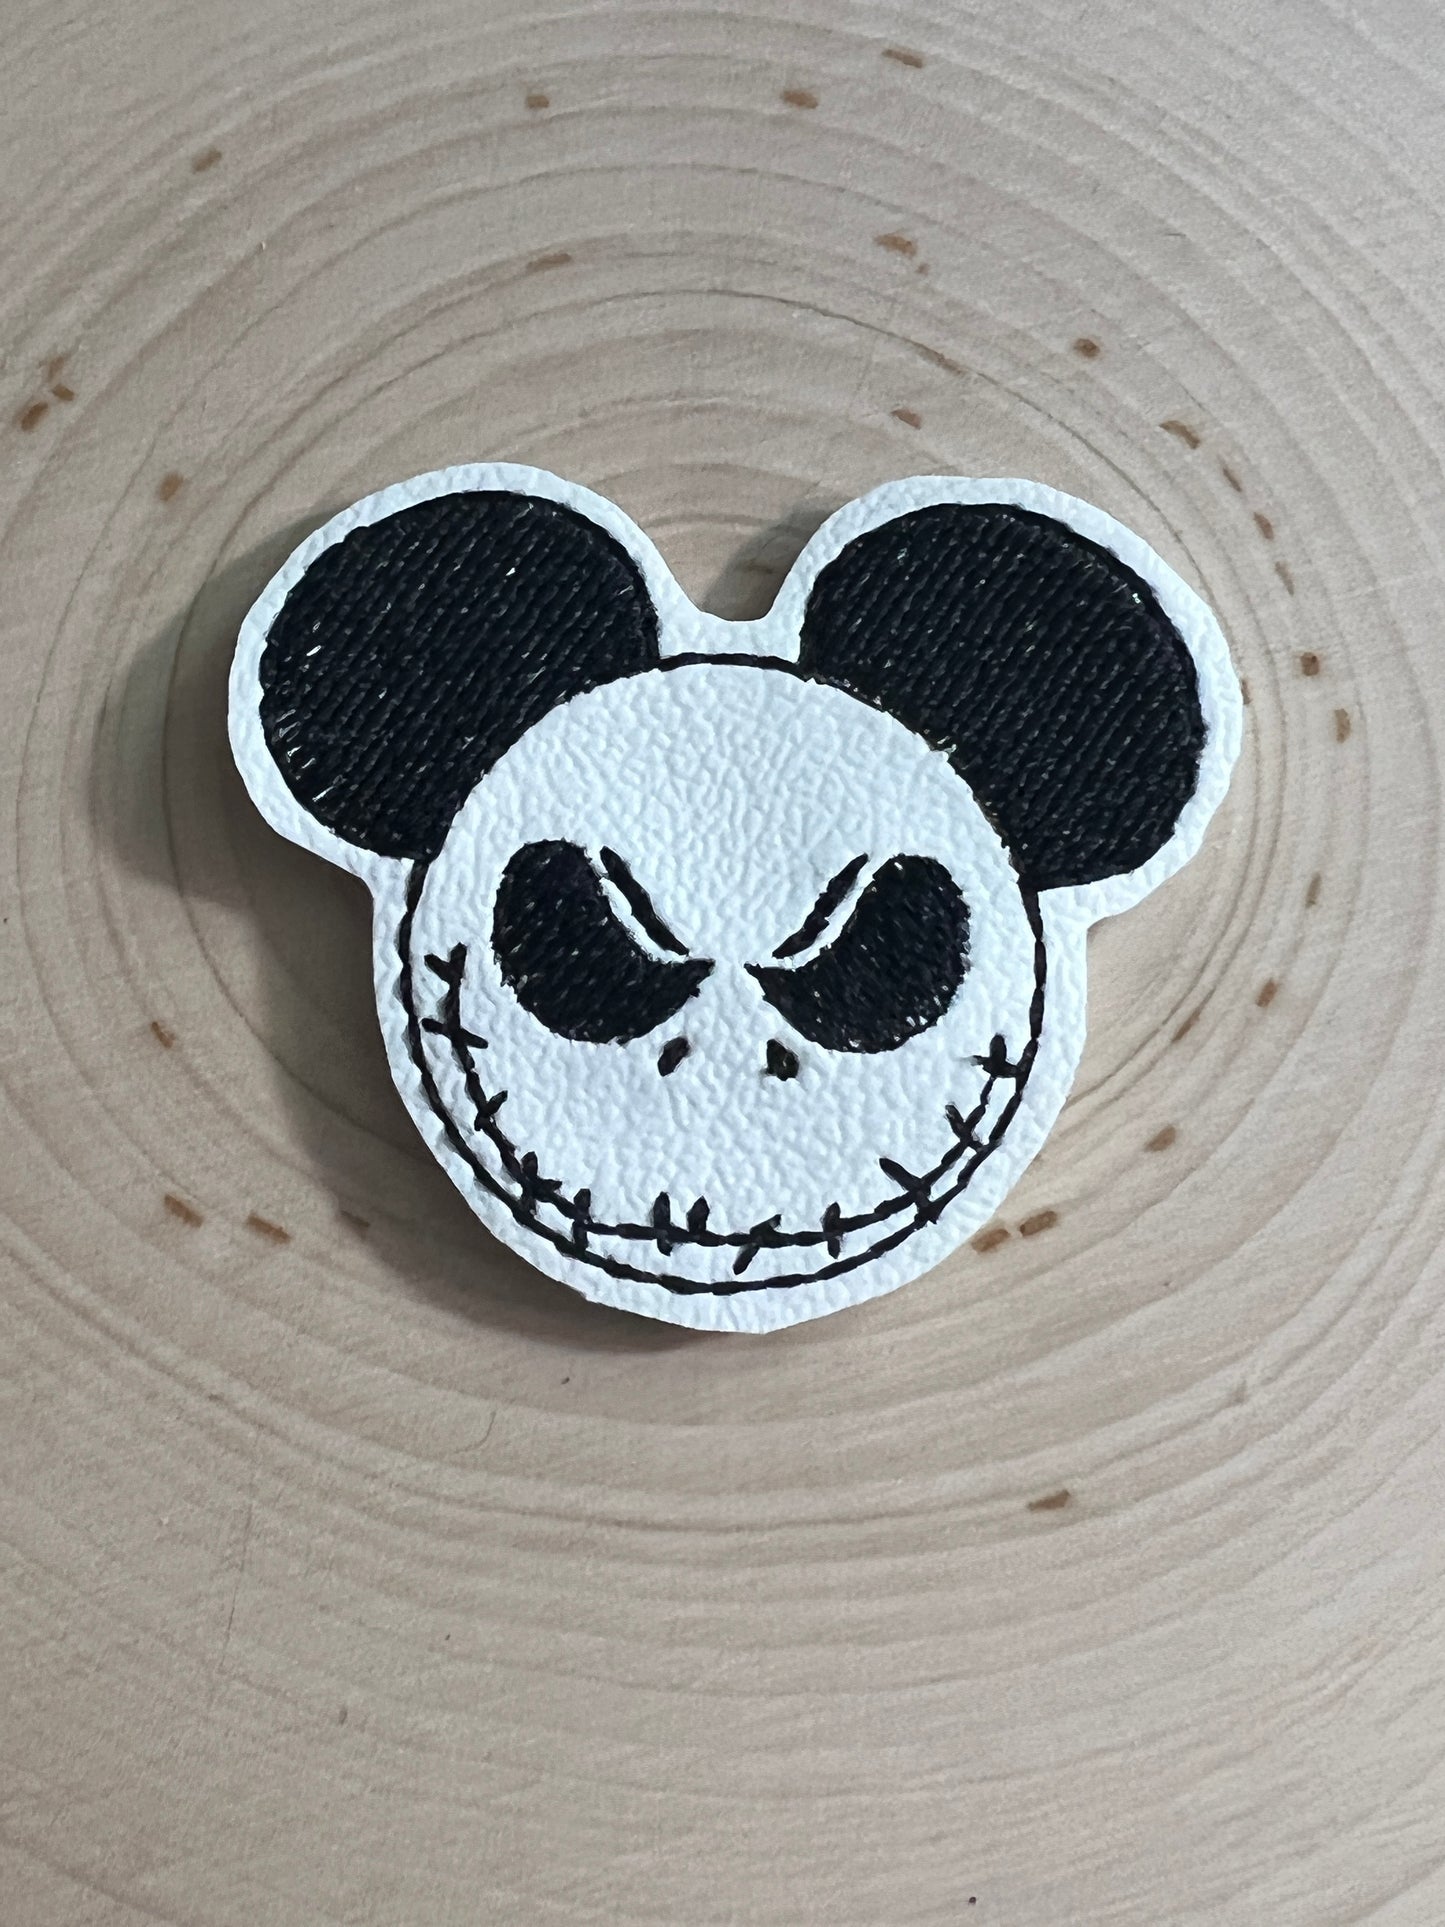 Skeleton with mouse ears